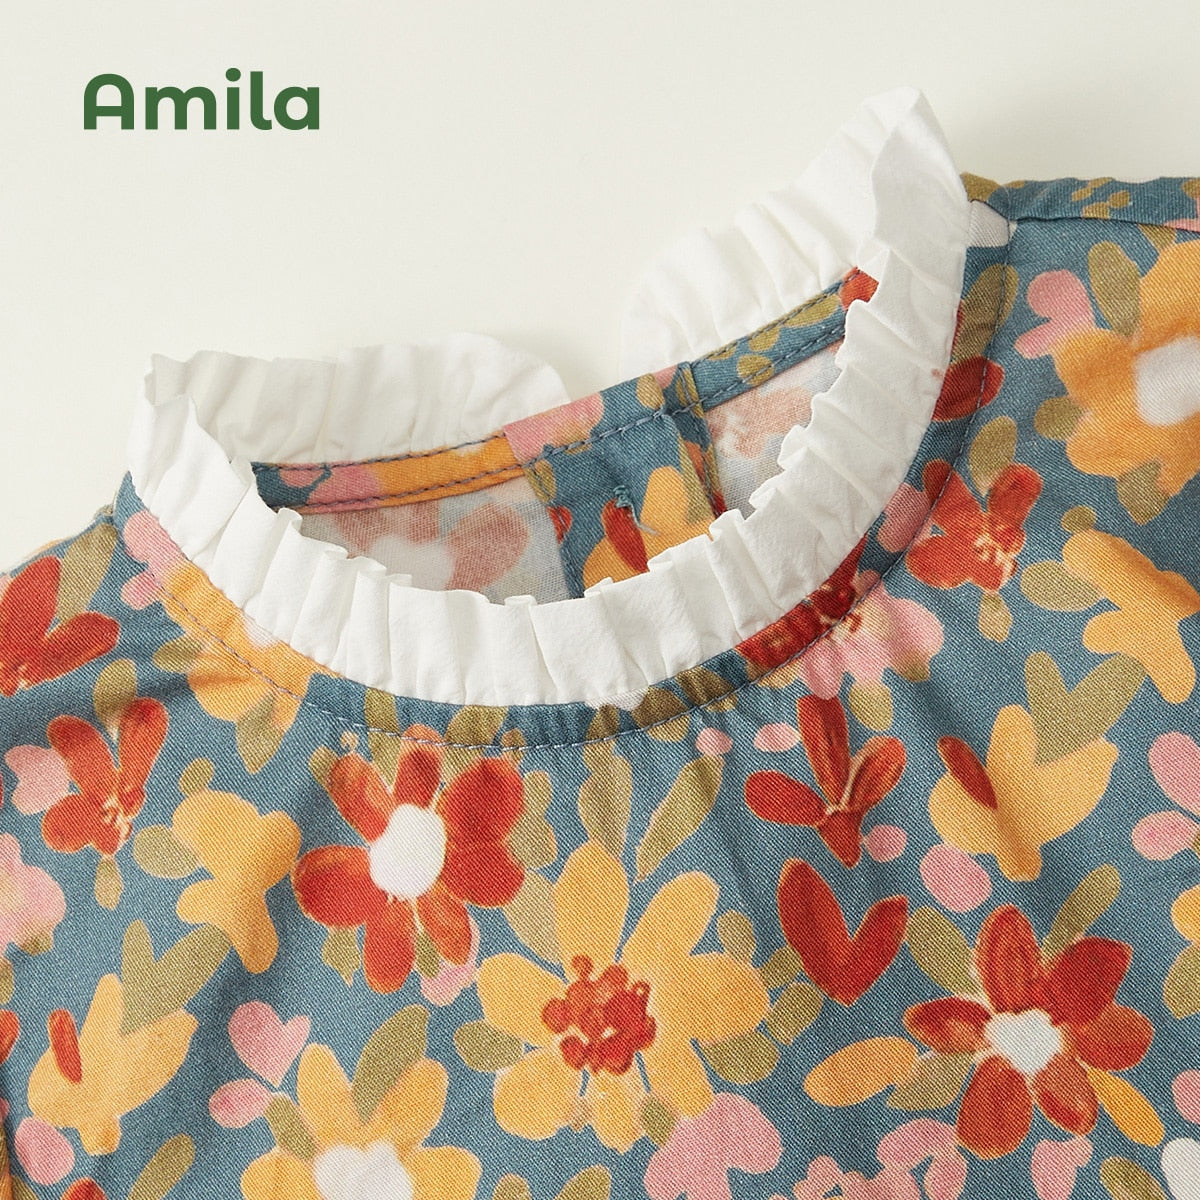 Amila Baby Girl Dress 2022 Autumn New 100% Cotton Long Sleeves A-Line Skirt for Girls Flower Sweet Children Clothes Fashion